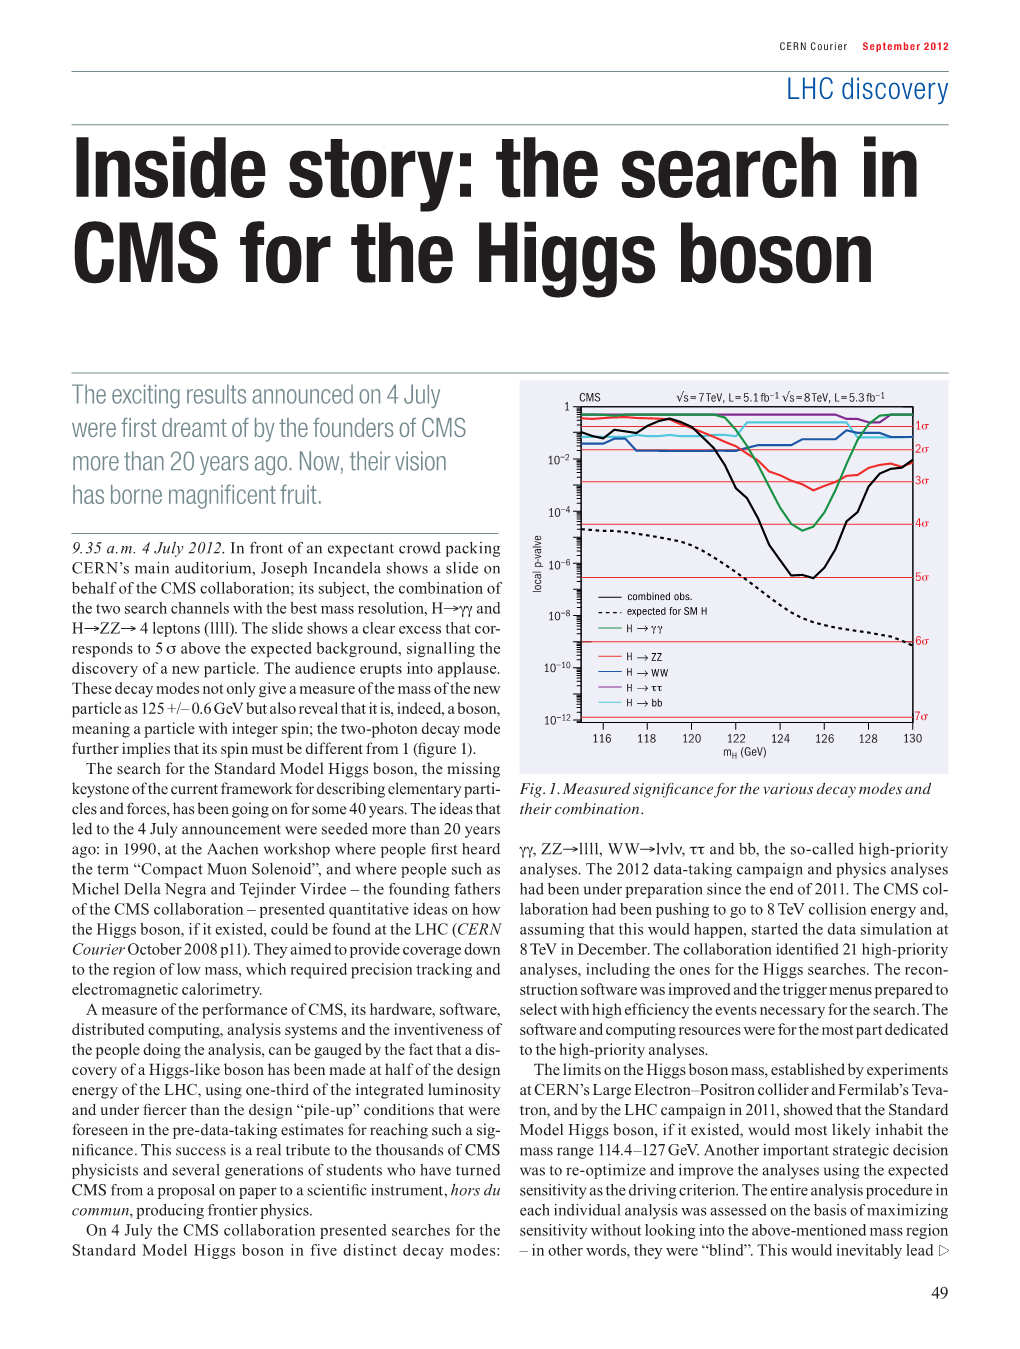 Inside Story: the Search in CMS for the Higgs Boson